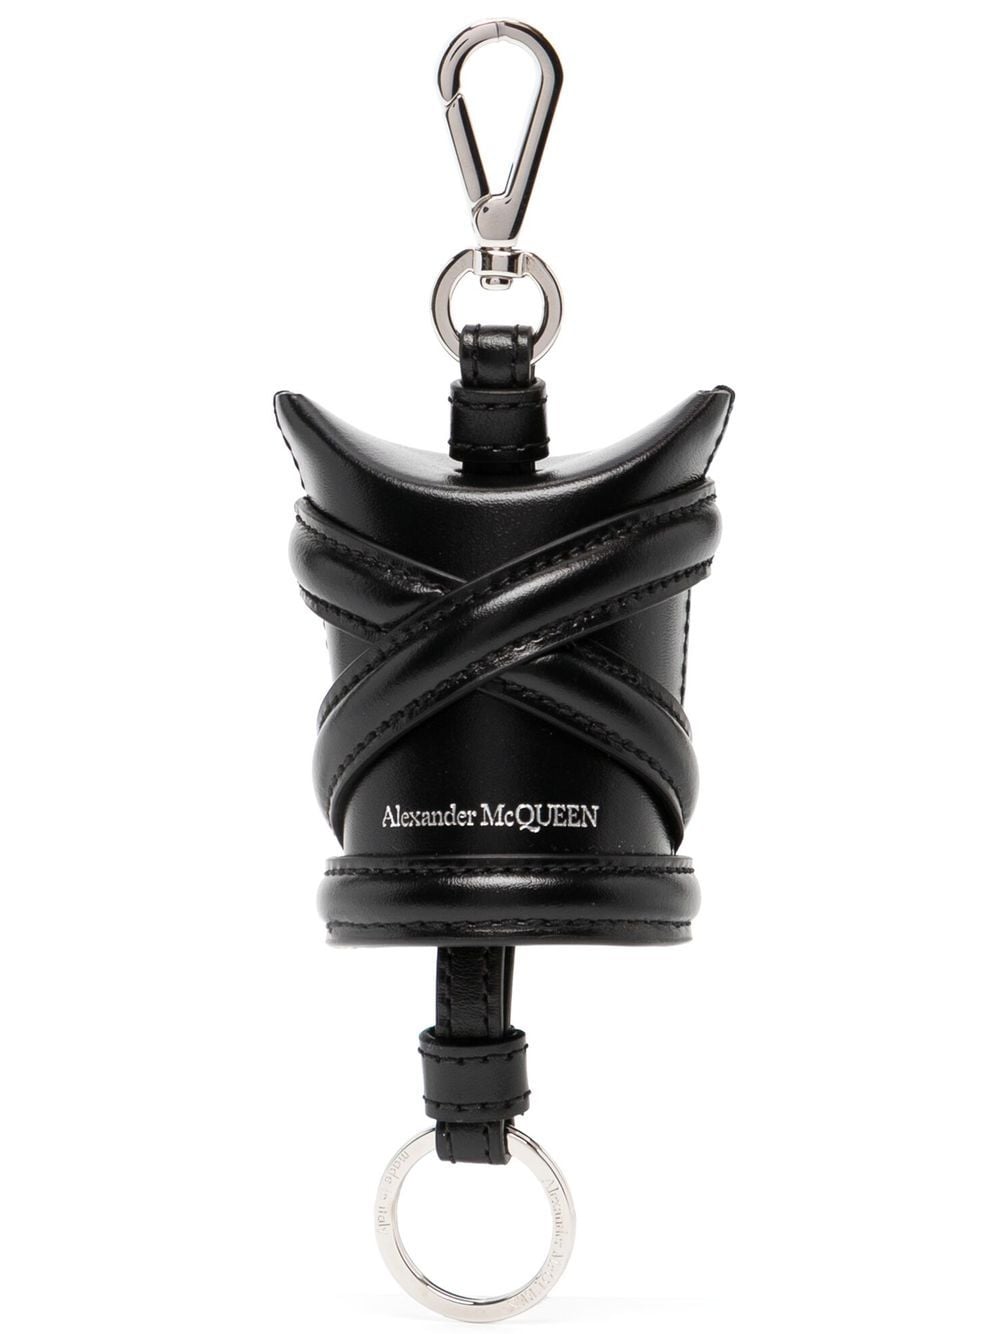 Alexander McQueen The Curve leather key holder - Black